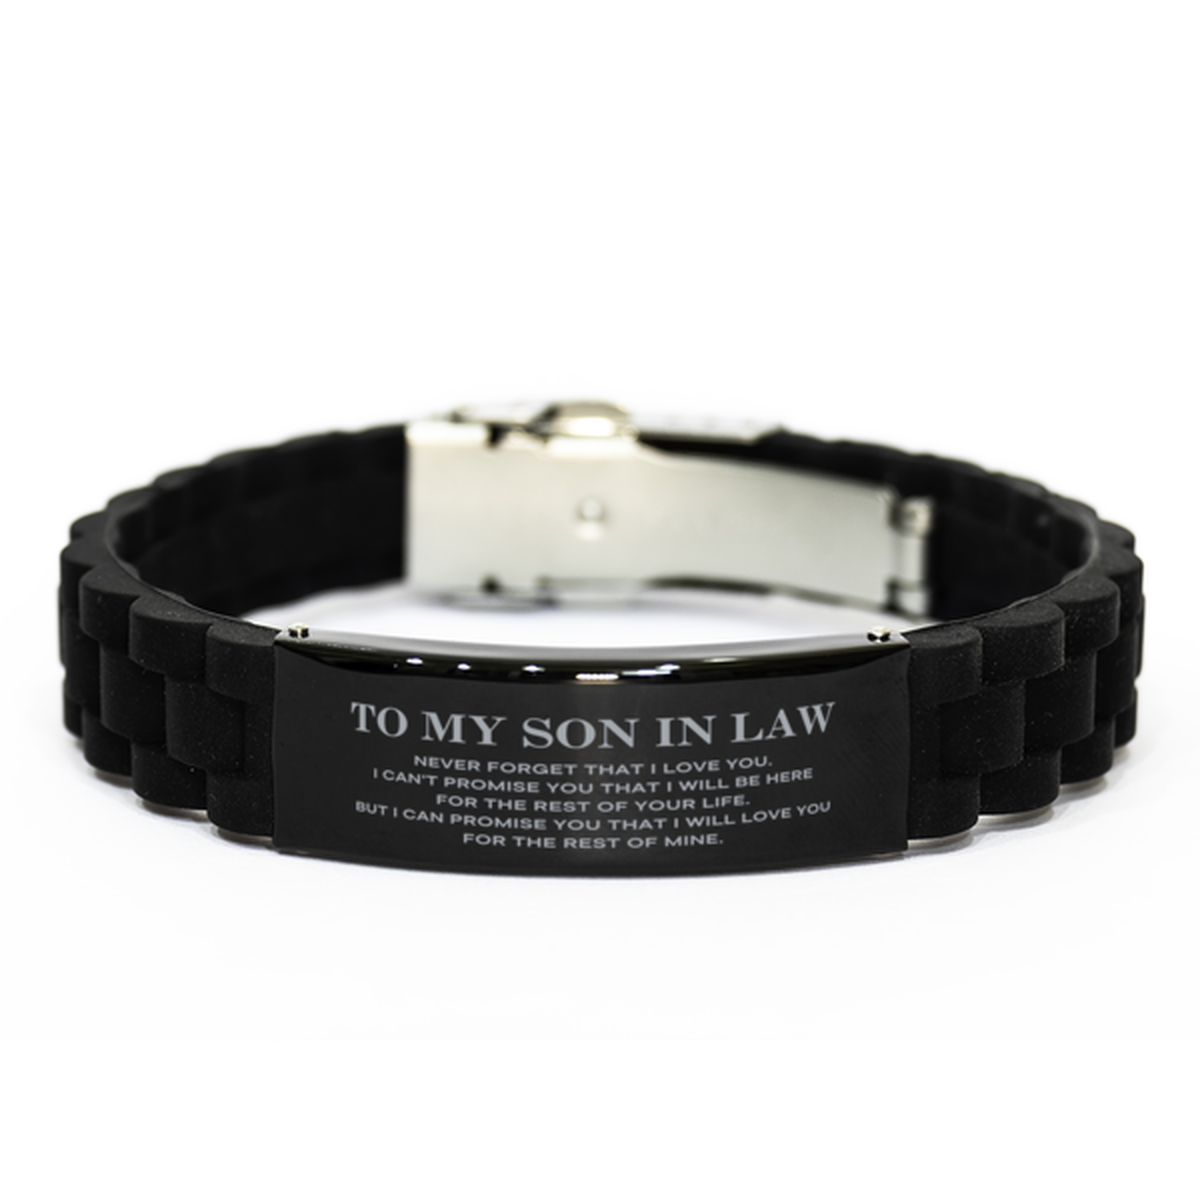 To My Son In Law Gifts, I will love you for the rest of mine, Love Son In Law Bracelet, Birthday Christmas Unique Black Glidelock Clasp Bracelet For Son In Law